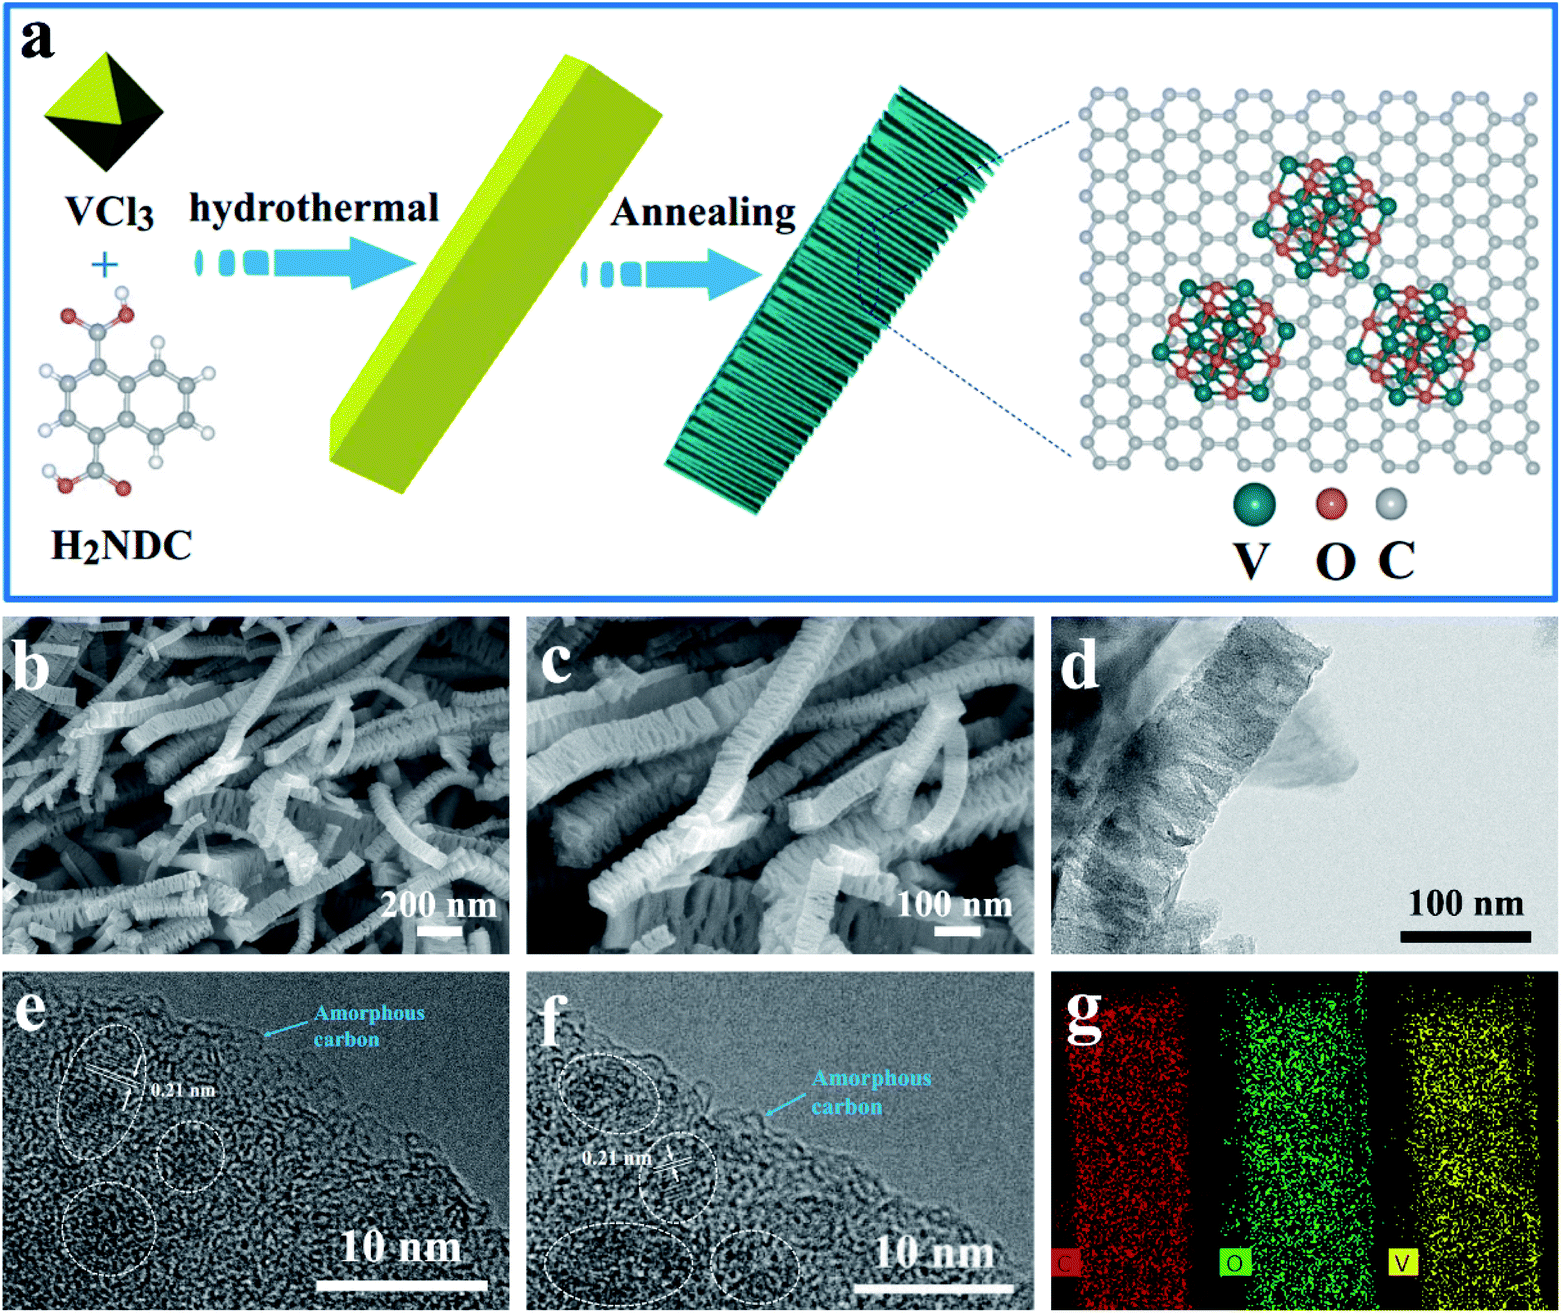 A Robust Spring Like Lamellar Vo C Nanostructure For High Rate And Long Life Potassium Ion Batteries Journal Of Materials Chemistry A Rsc Publishing Doi 10 1039 D0ta045e